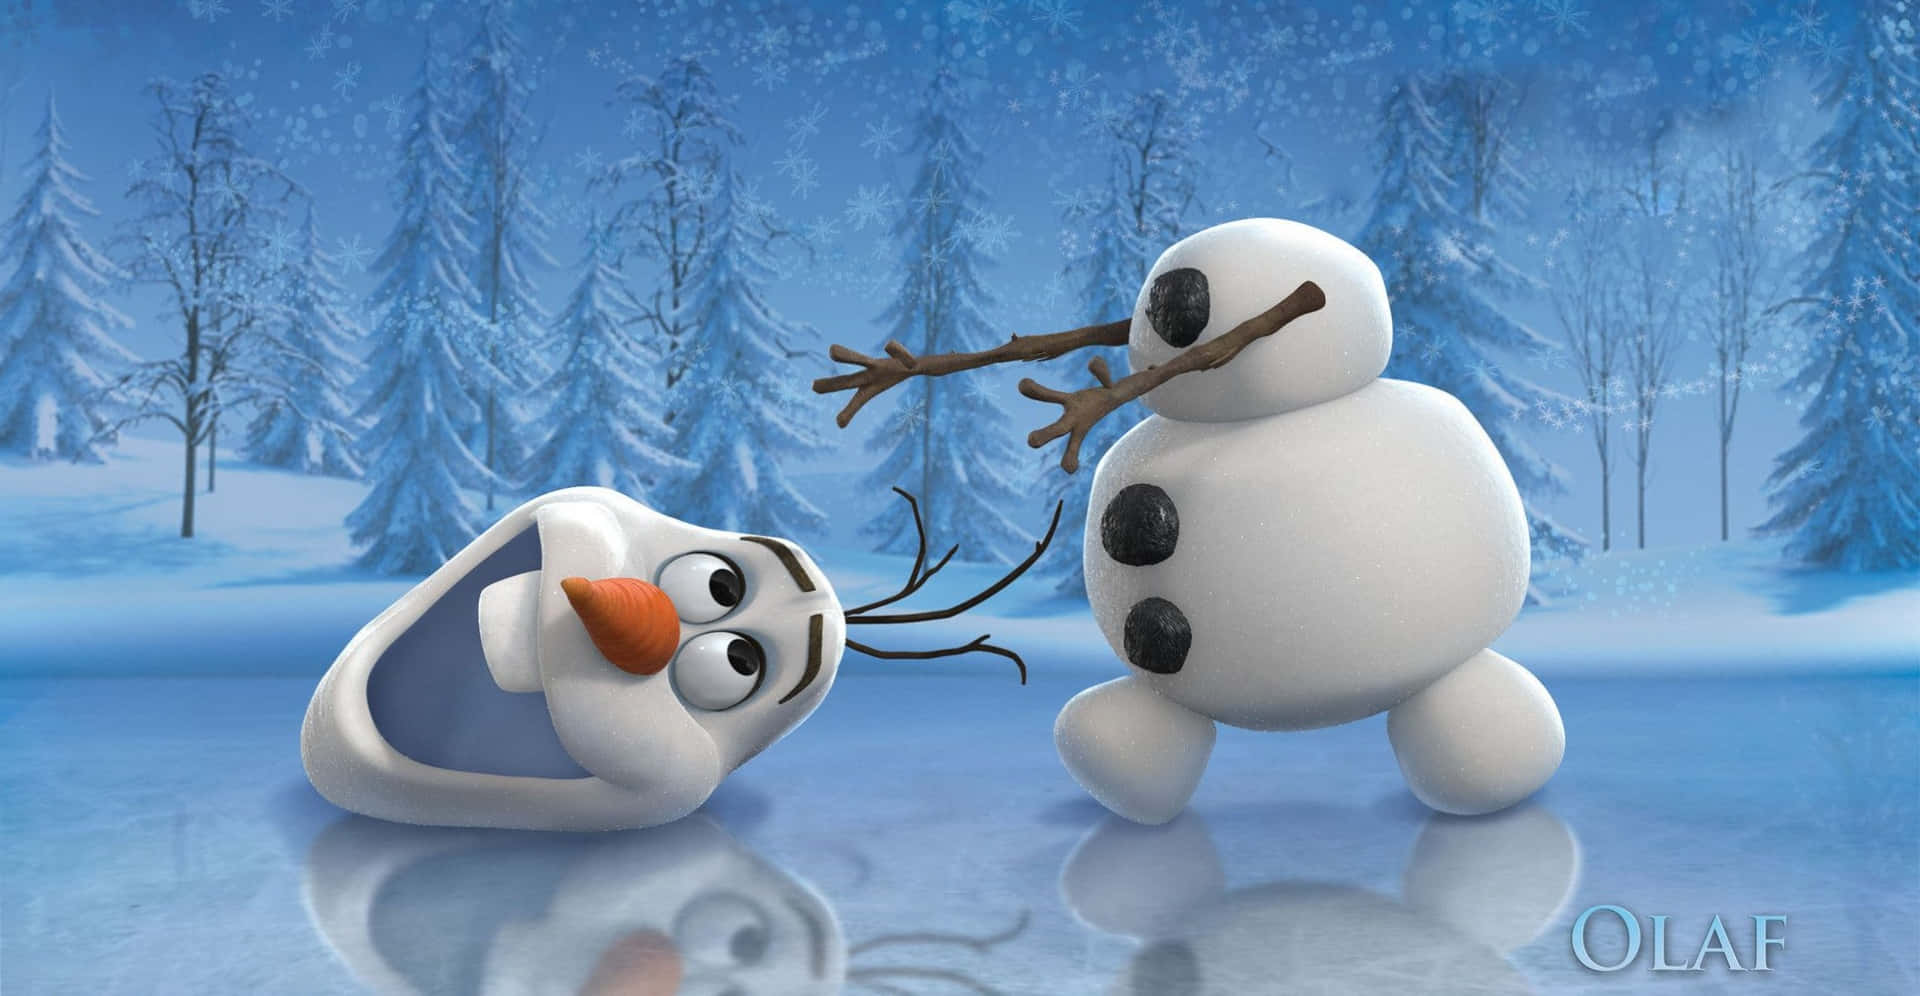 Funny Snow Olaf Frozen Chasing Head Picture